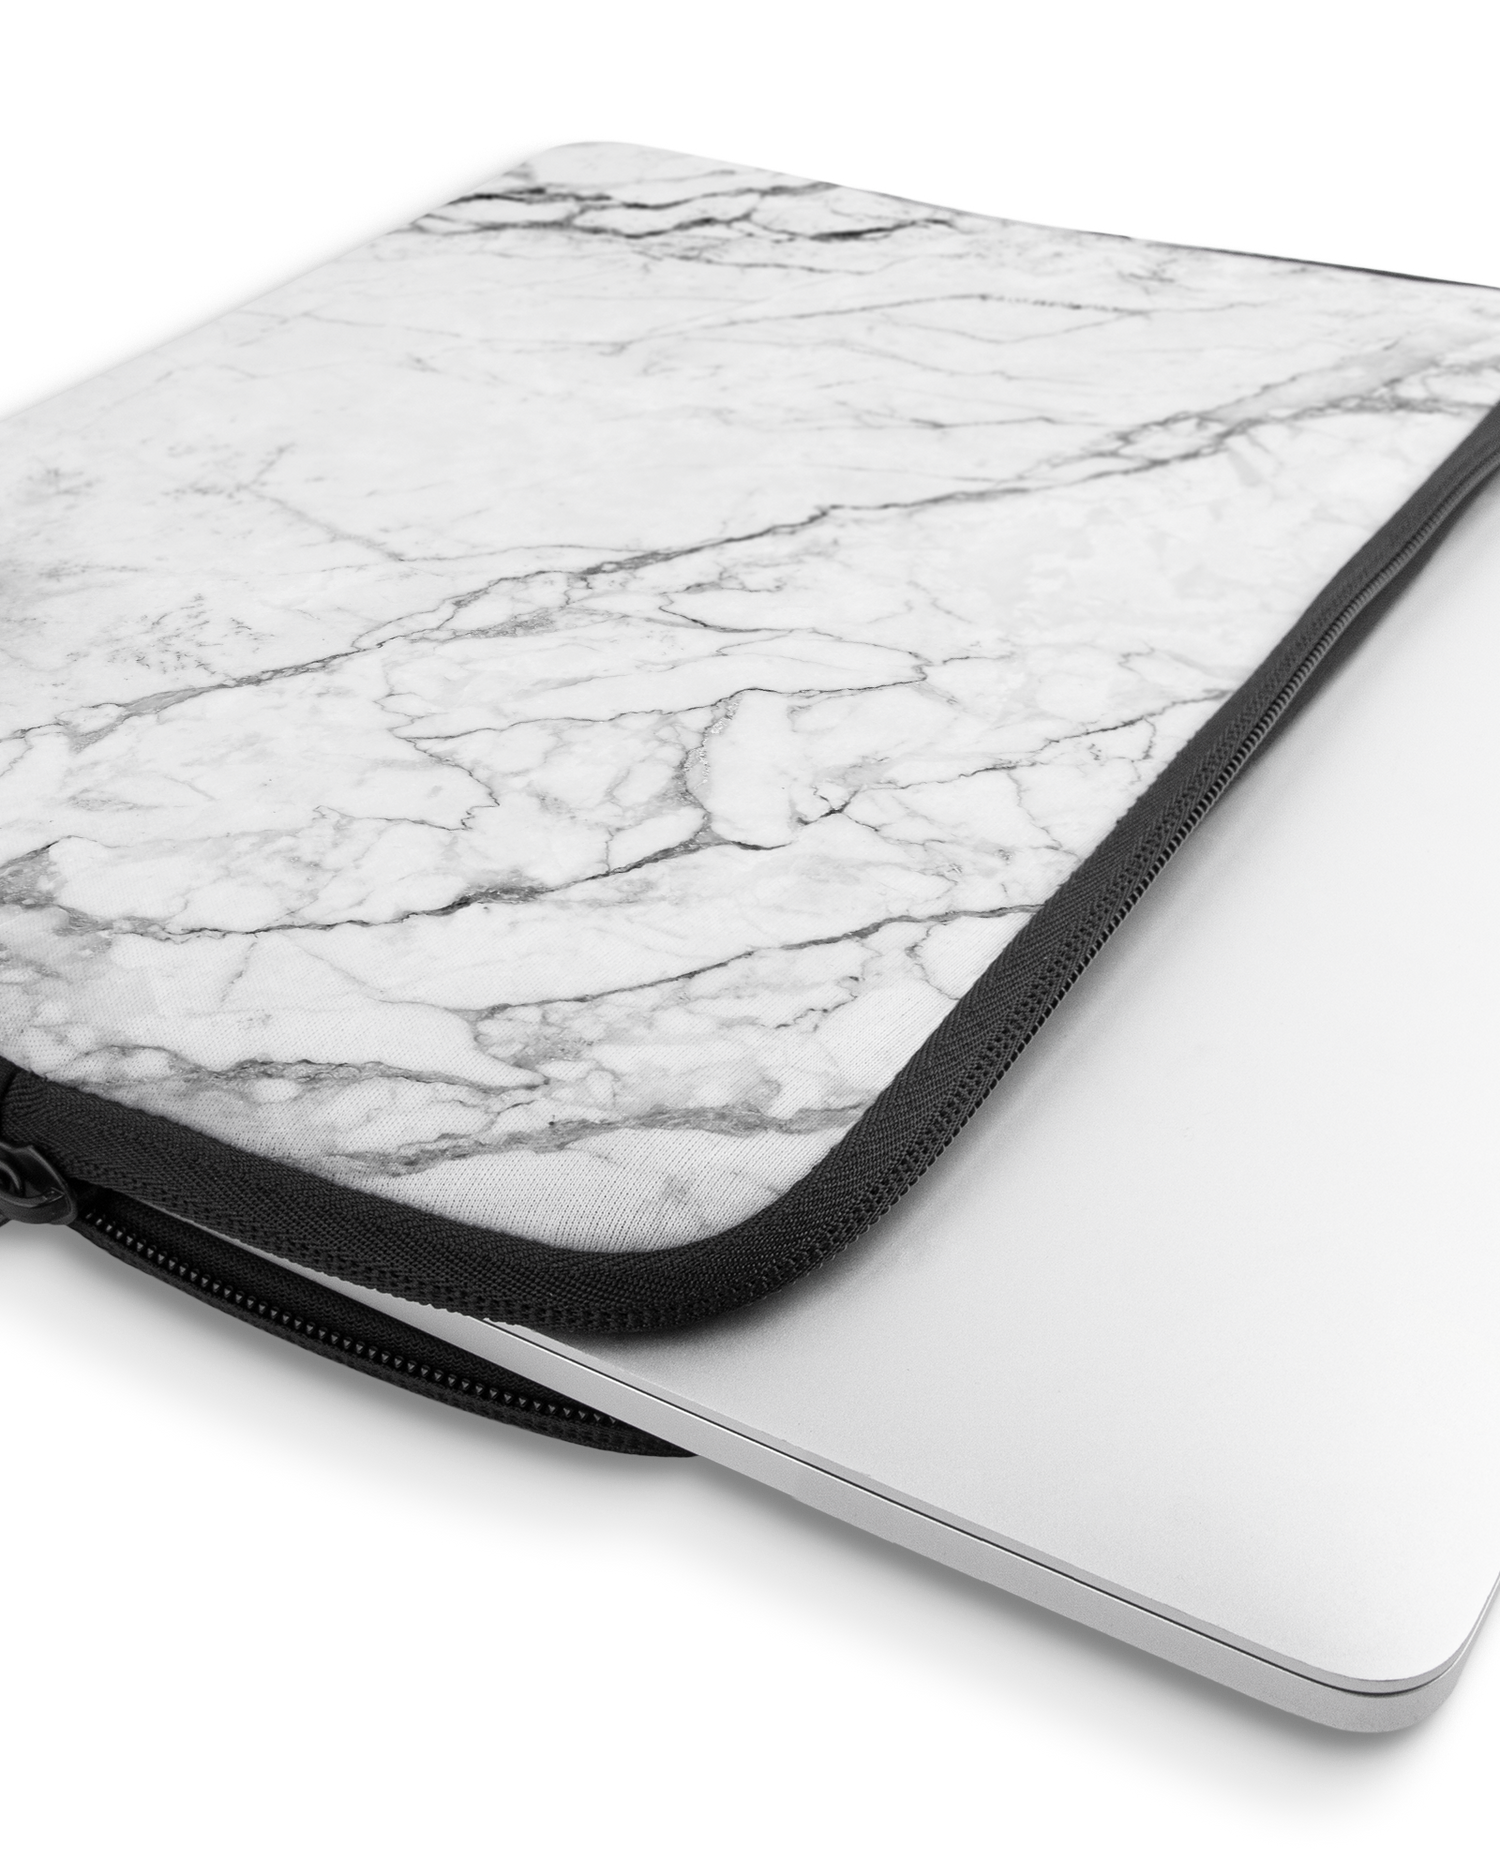 White Marble Laptop Case 13 inch with device inside